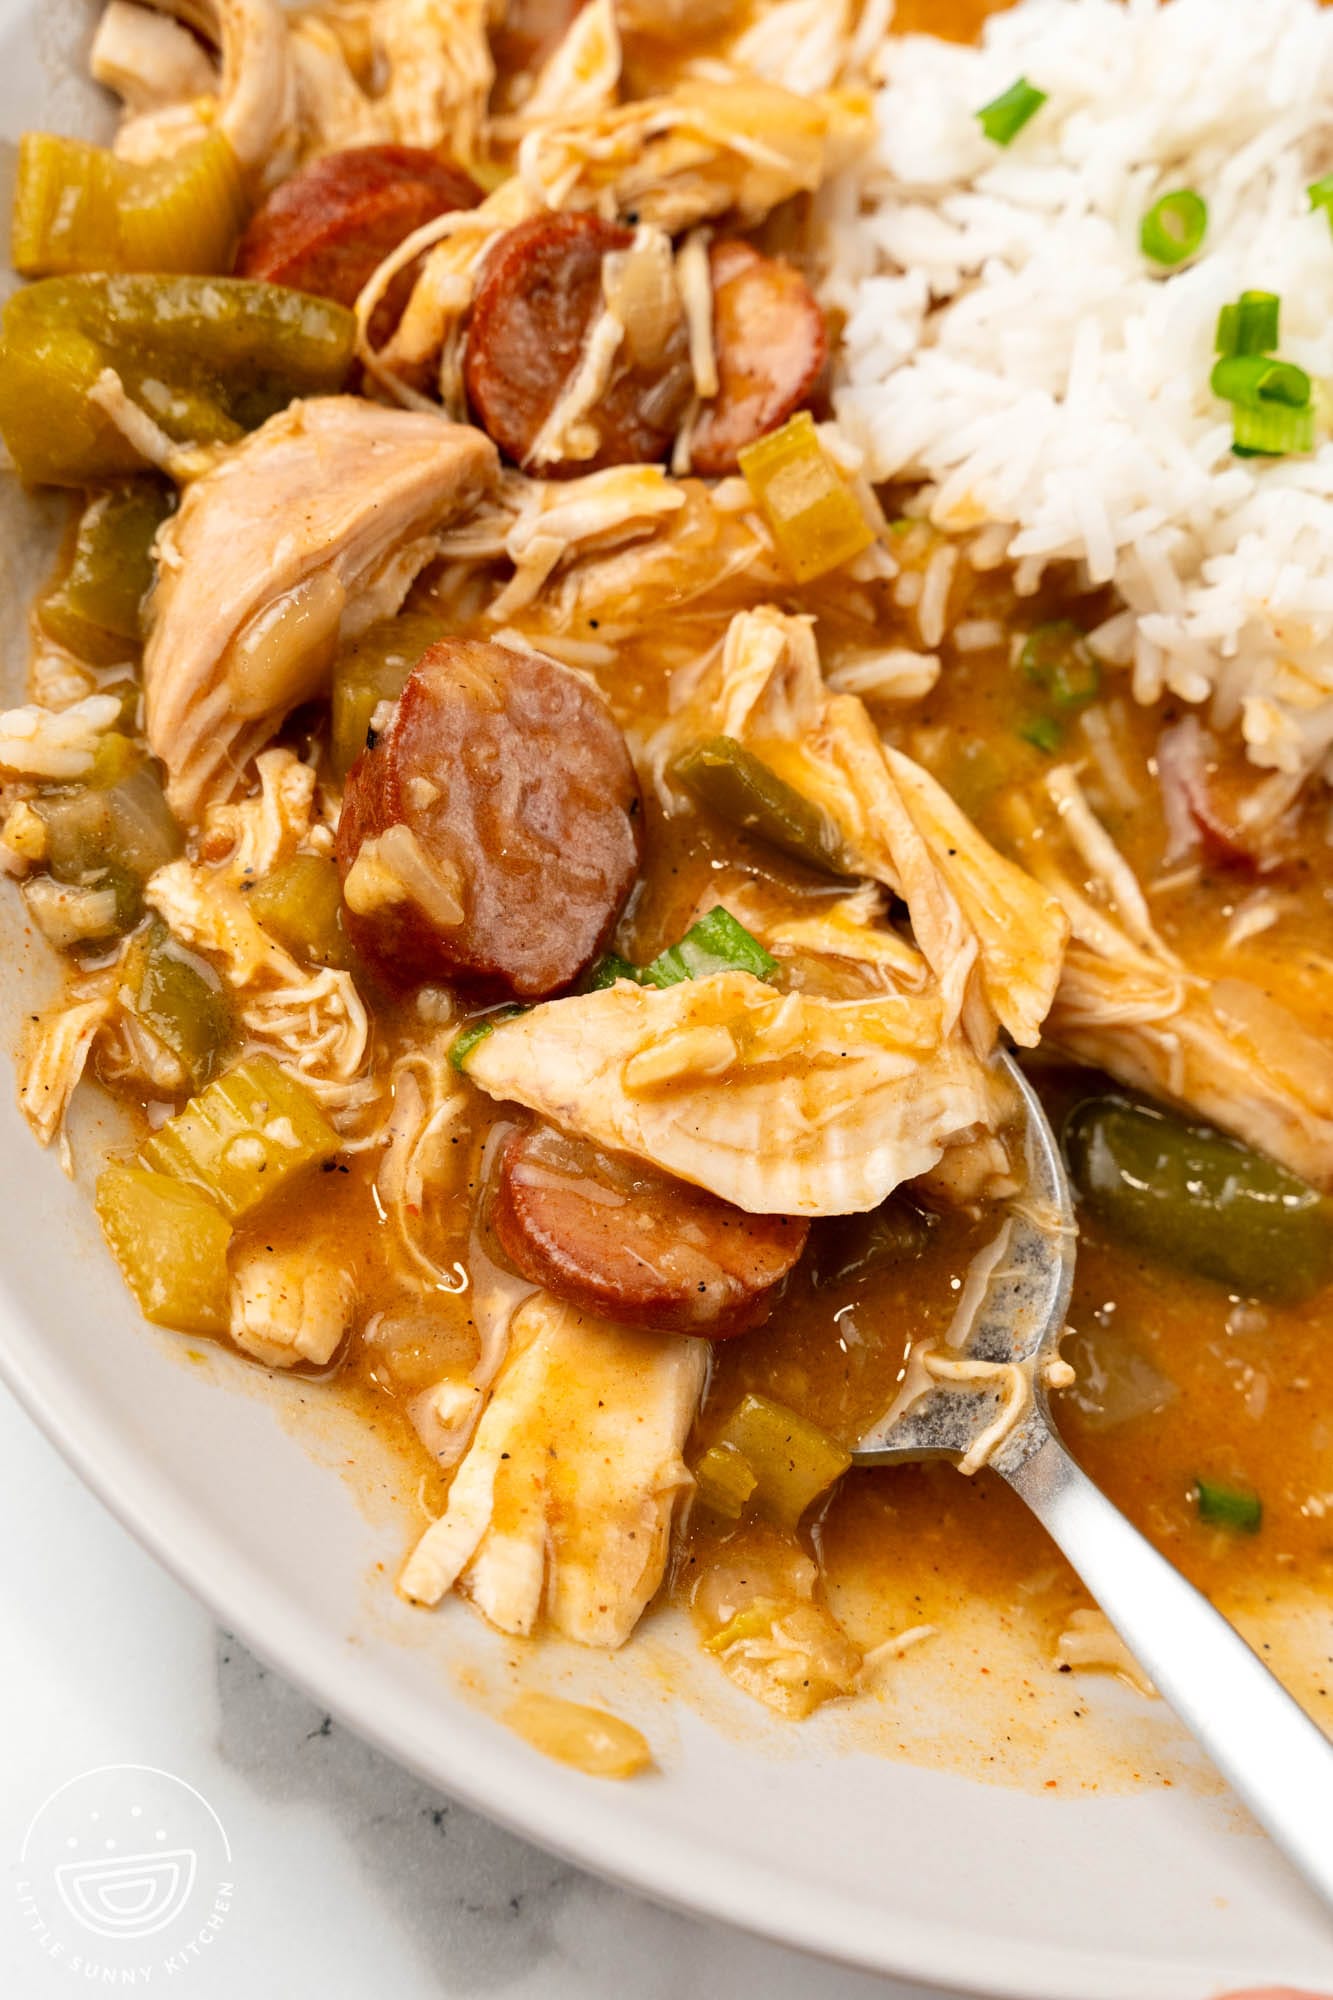 gumbo made with sliced sausage and shredded chicken on a plate with a side of rice.